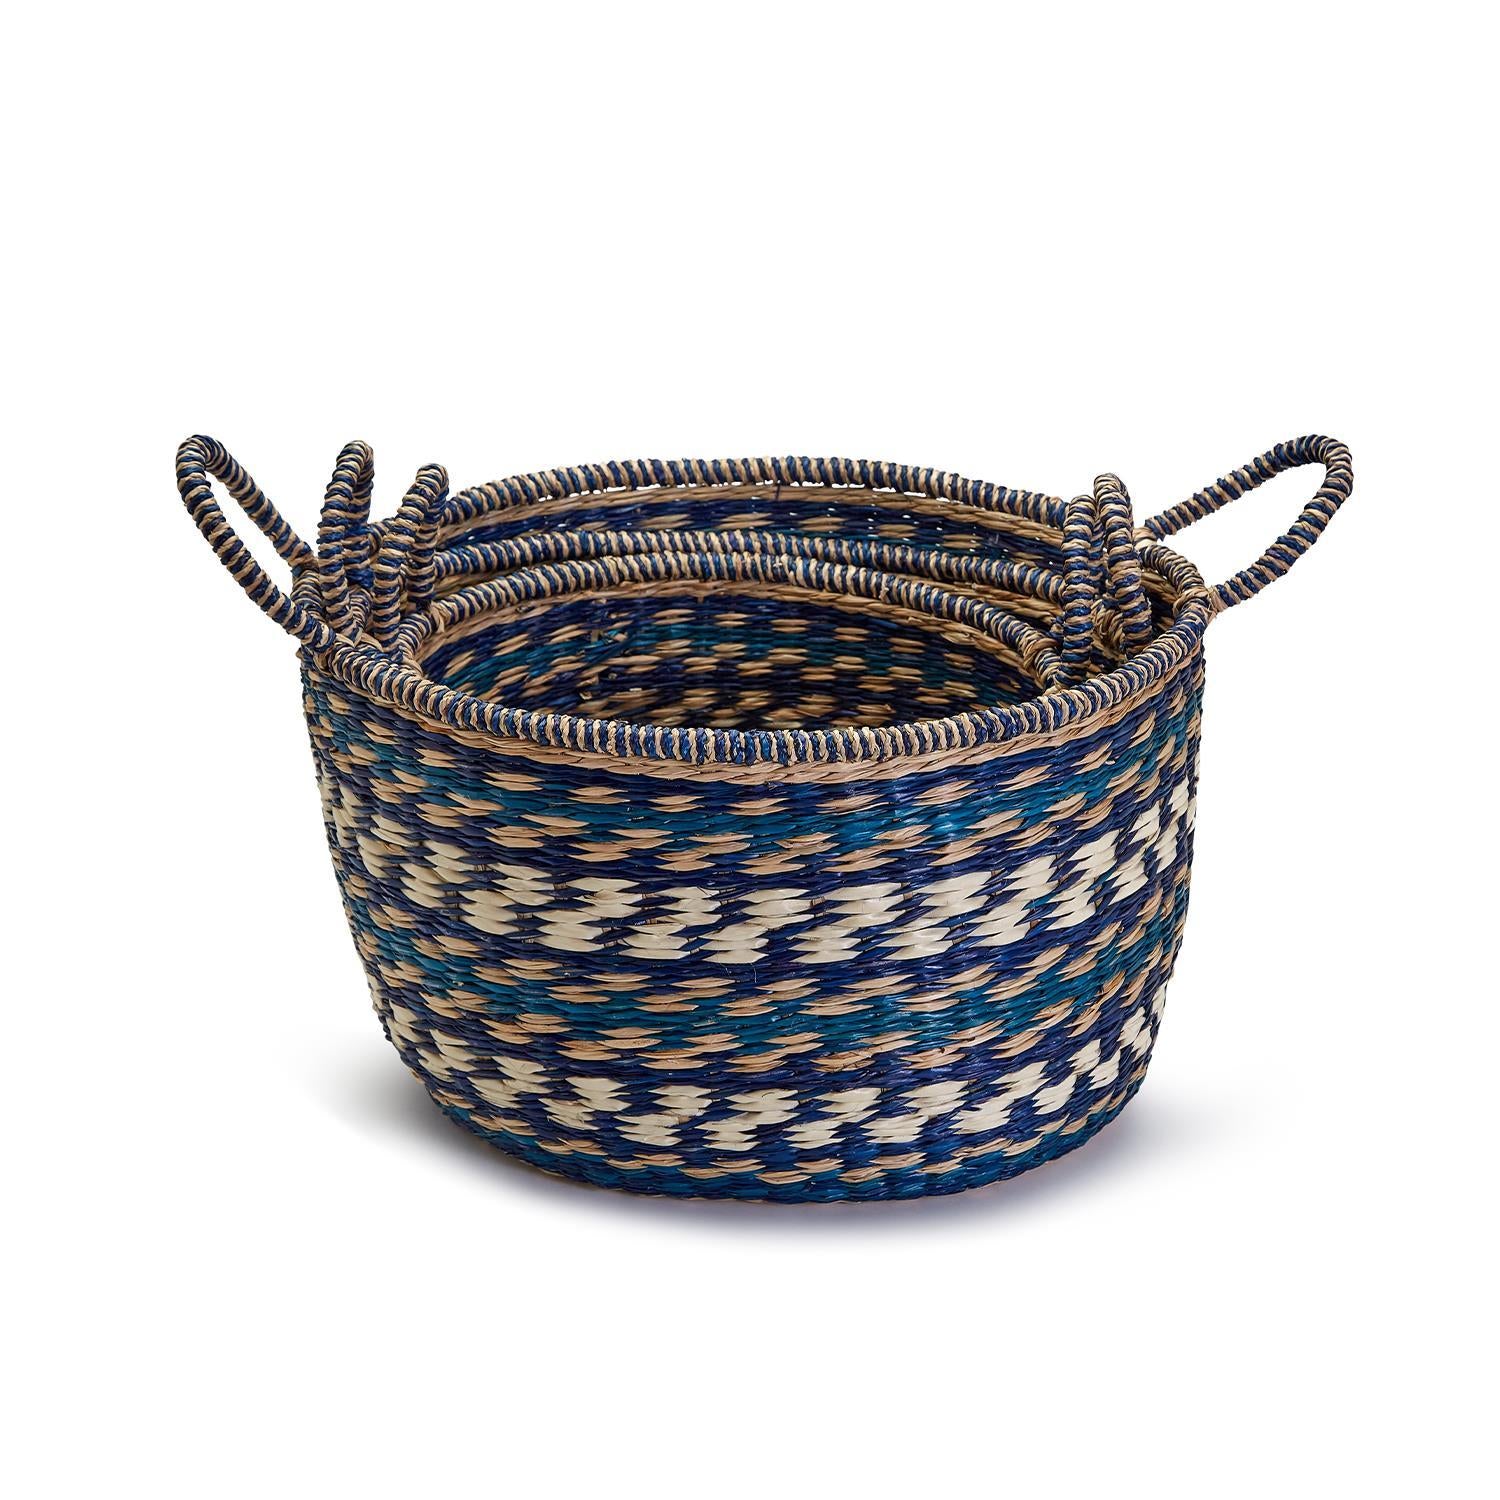 Two's Company S/3 Talamanca Baskets Incl 3 Sizes